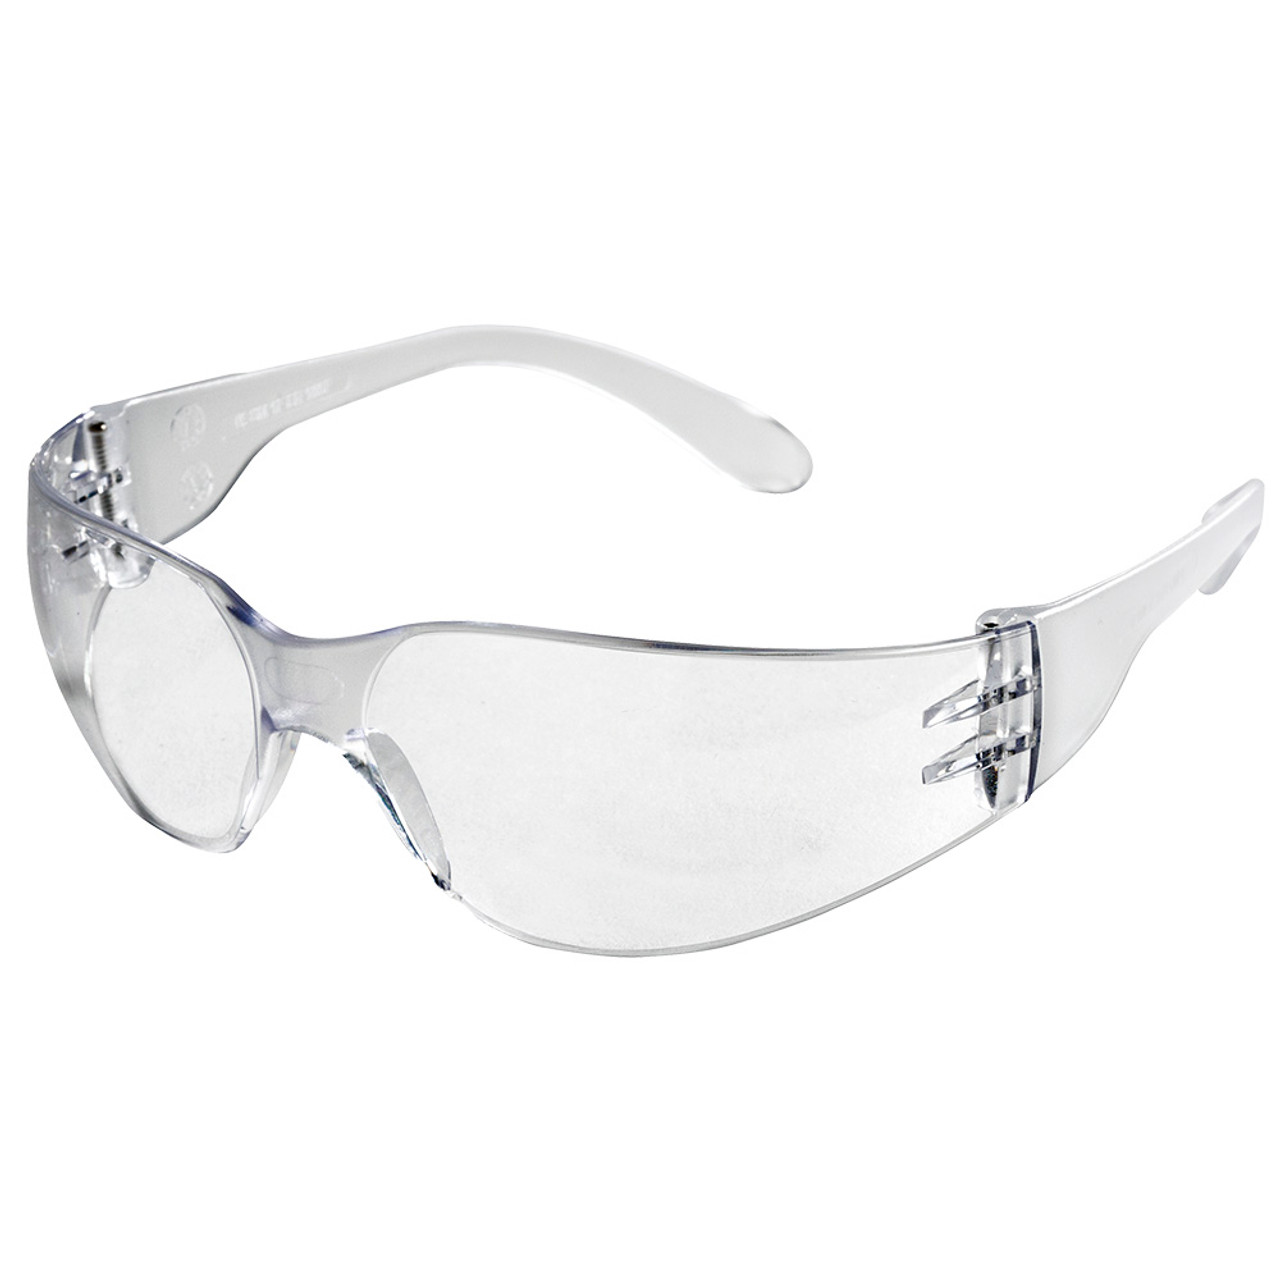 Sellstrom® X300 Series Hard Coated Wrap Around Safety Glasses - Indoor/Outdoor  S70731